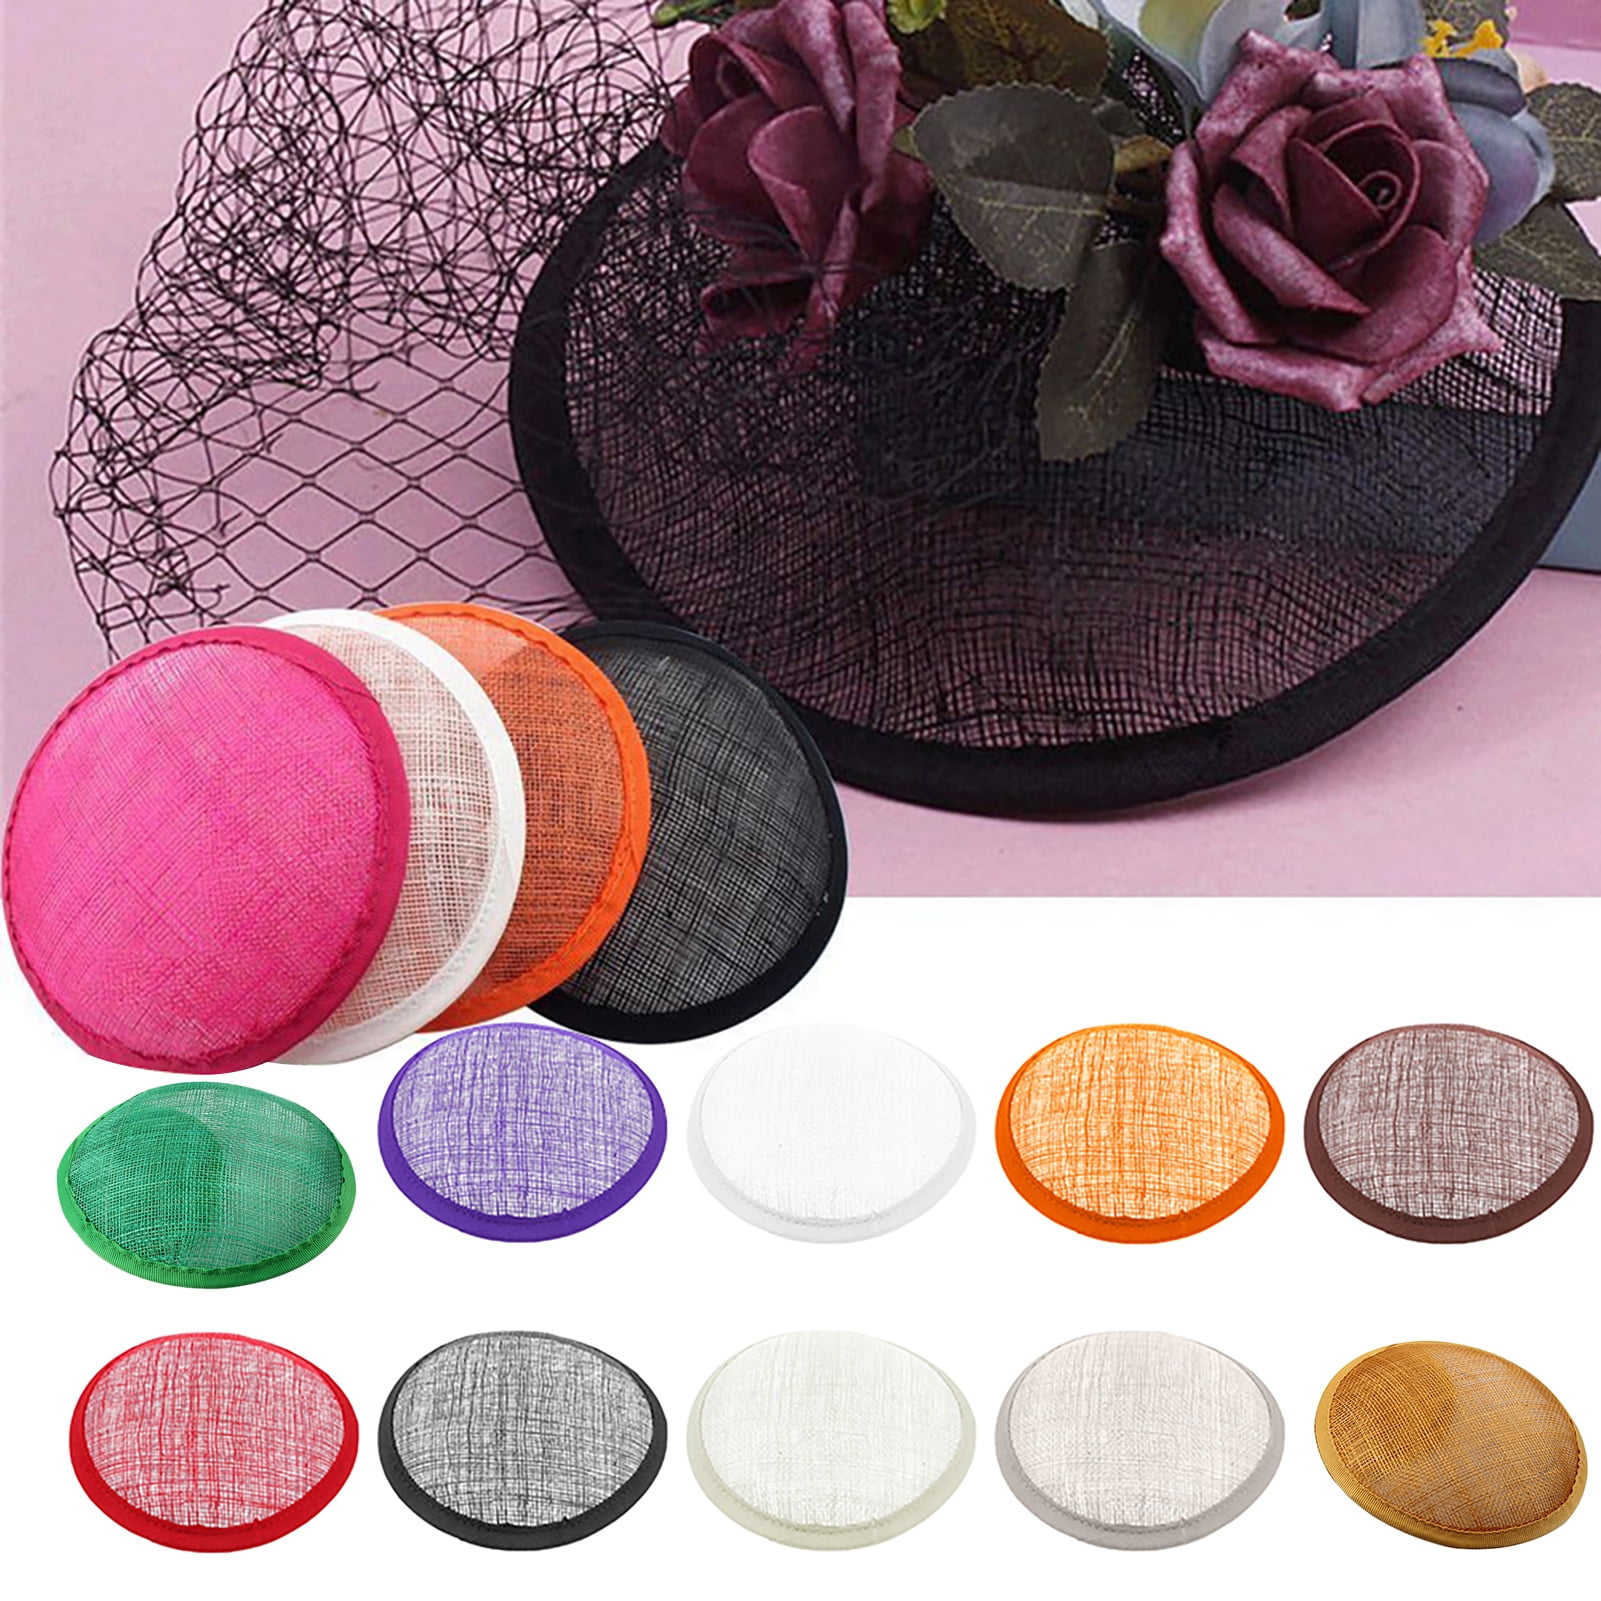  NOLITOY 4pcs Round Linen Hat Holder Millinery Supplies Sinamay  Saucer Tea Party Hat Base Millinery Hat Base Hat Making Supplies Hats Diy  Round Base Bottom Bracket Striped Bass : Clothing, Shoes